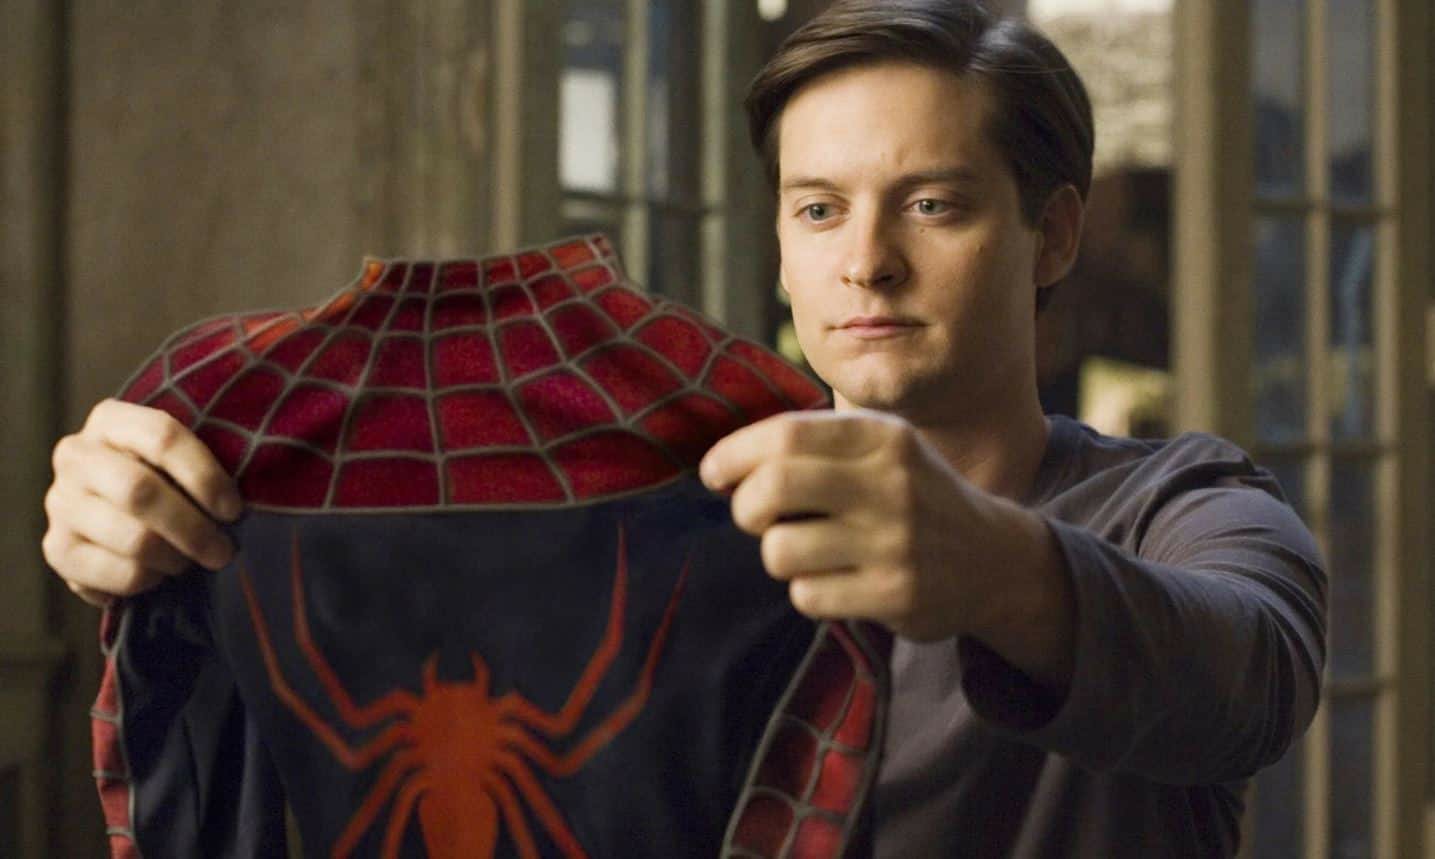 Spiderman 2 :- Tobey Maguire as Peter Parker/Spider man (Credit - Marvel Studios & Sony Pictures)